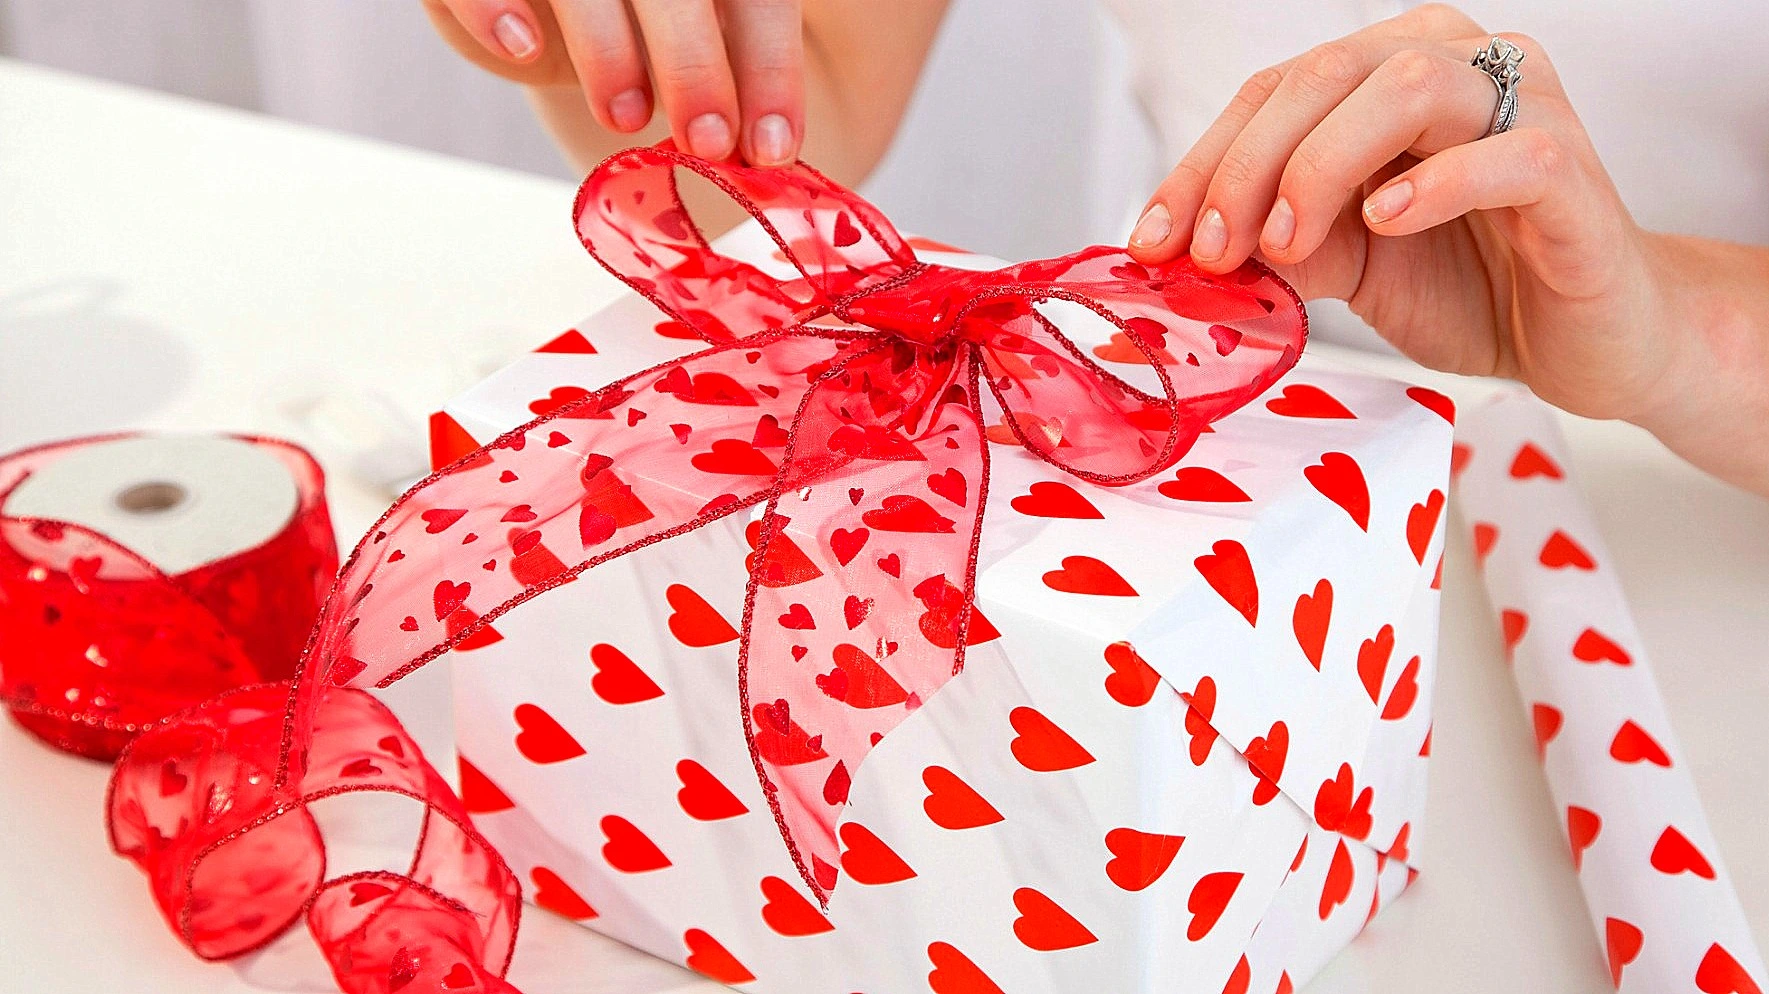 What to give on Valentine's Day